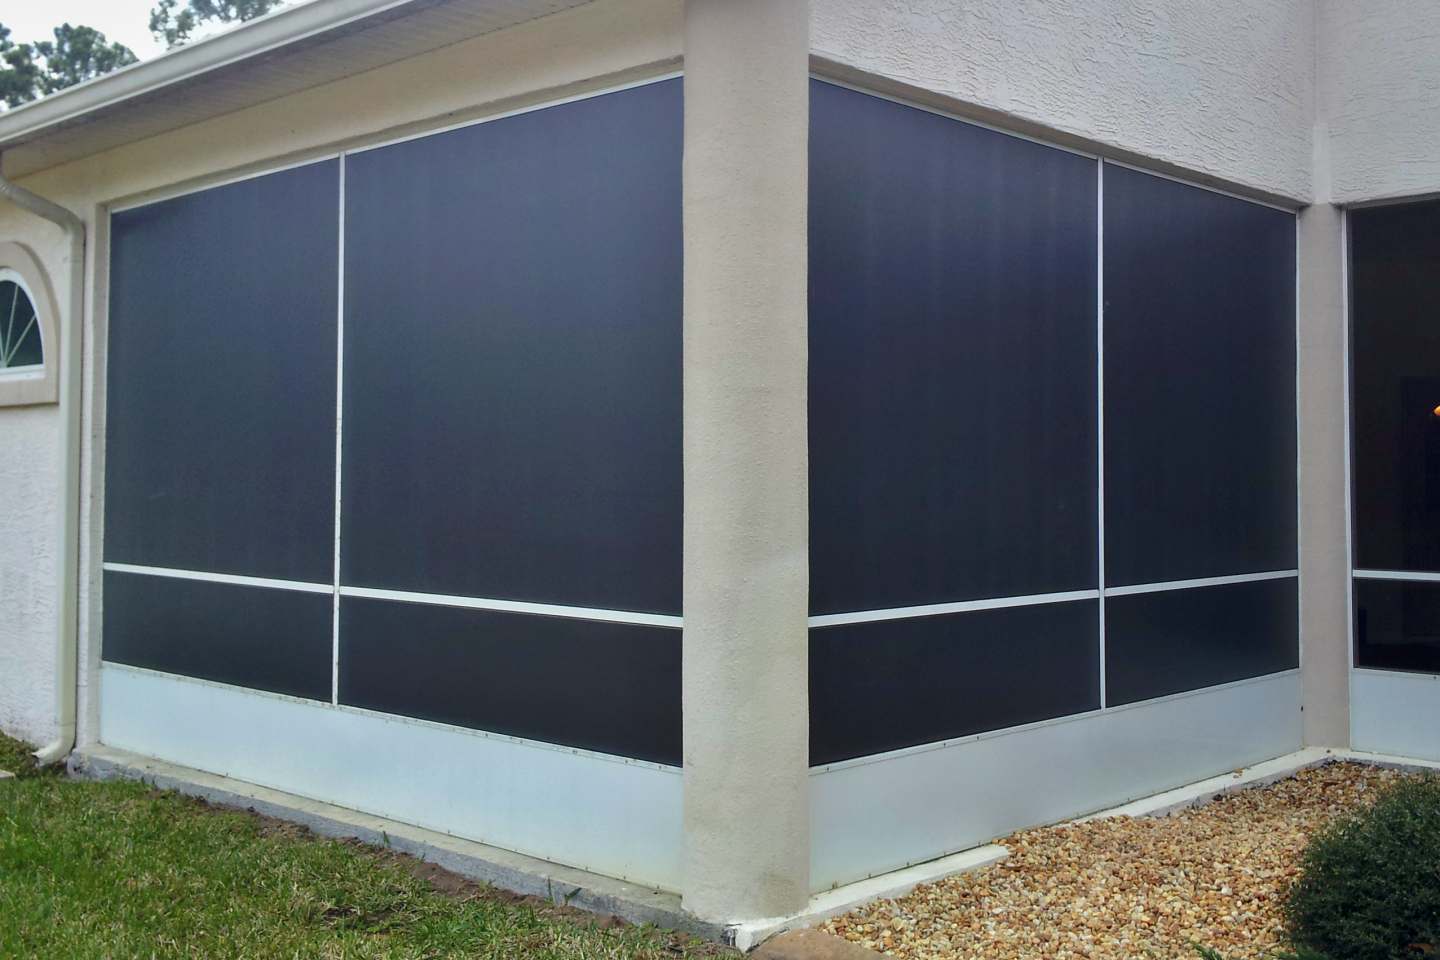 02-after-install-florida-glass-privacy-screen.jpg